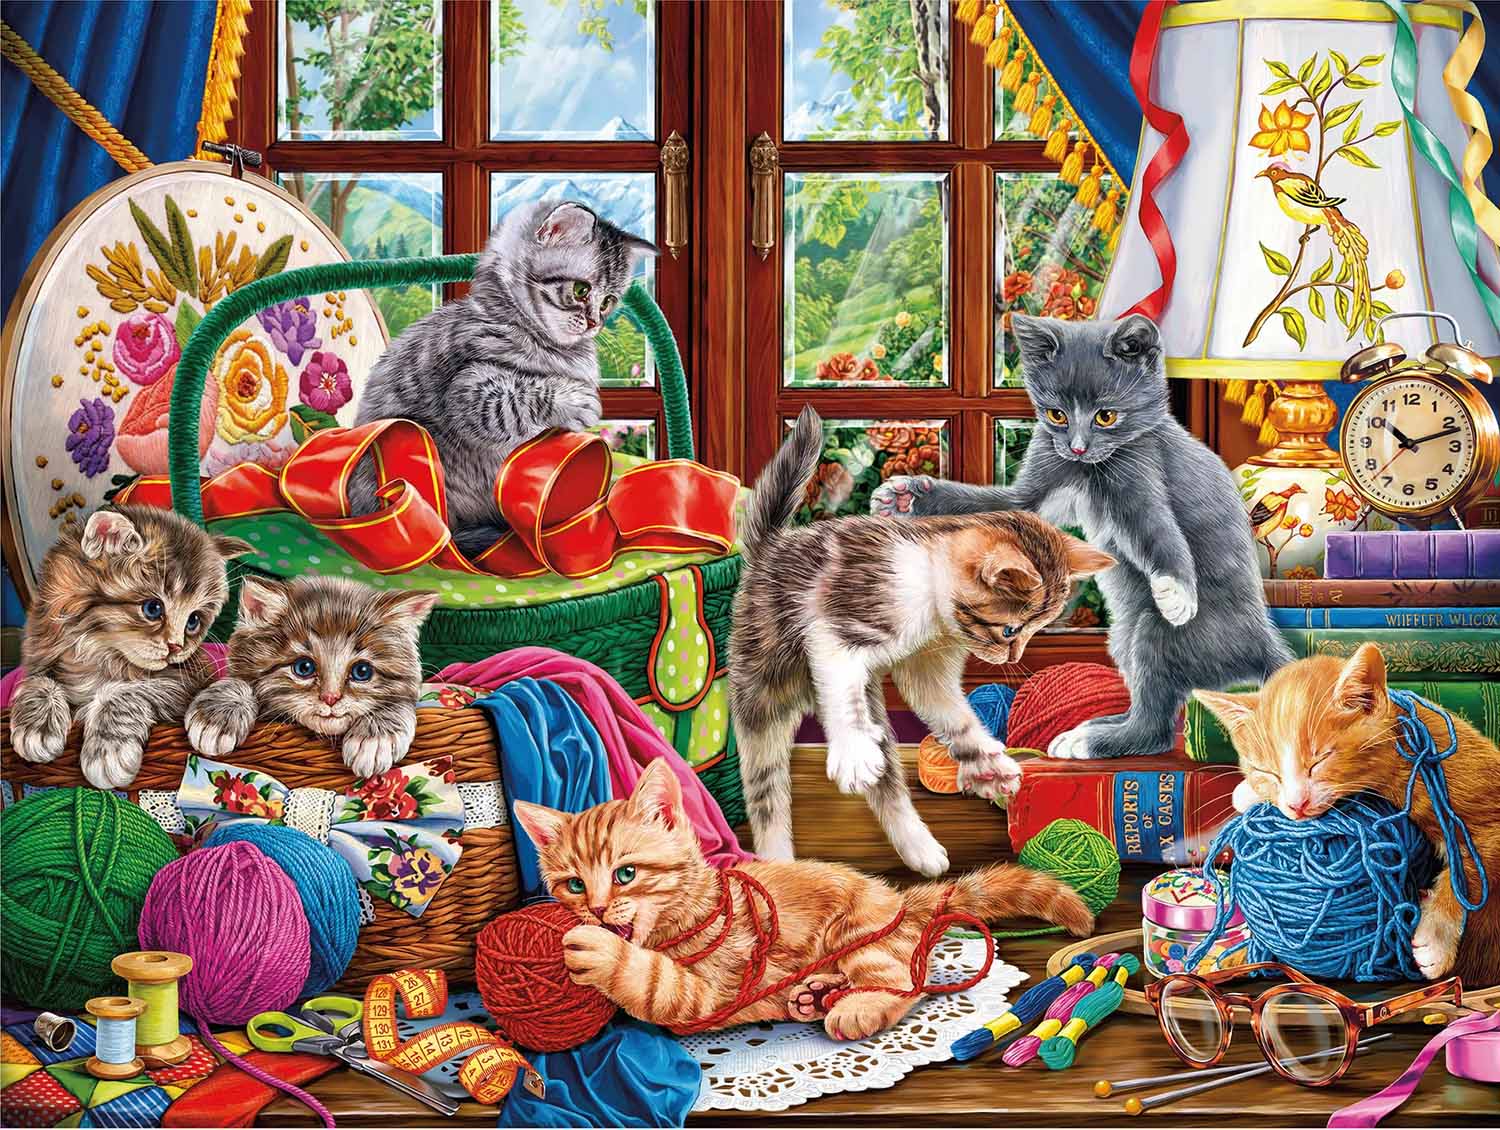 Paws Gone Wild - Cheerful Kittens Cats Jigsaw Puzzle